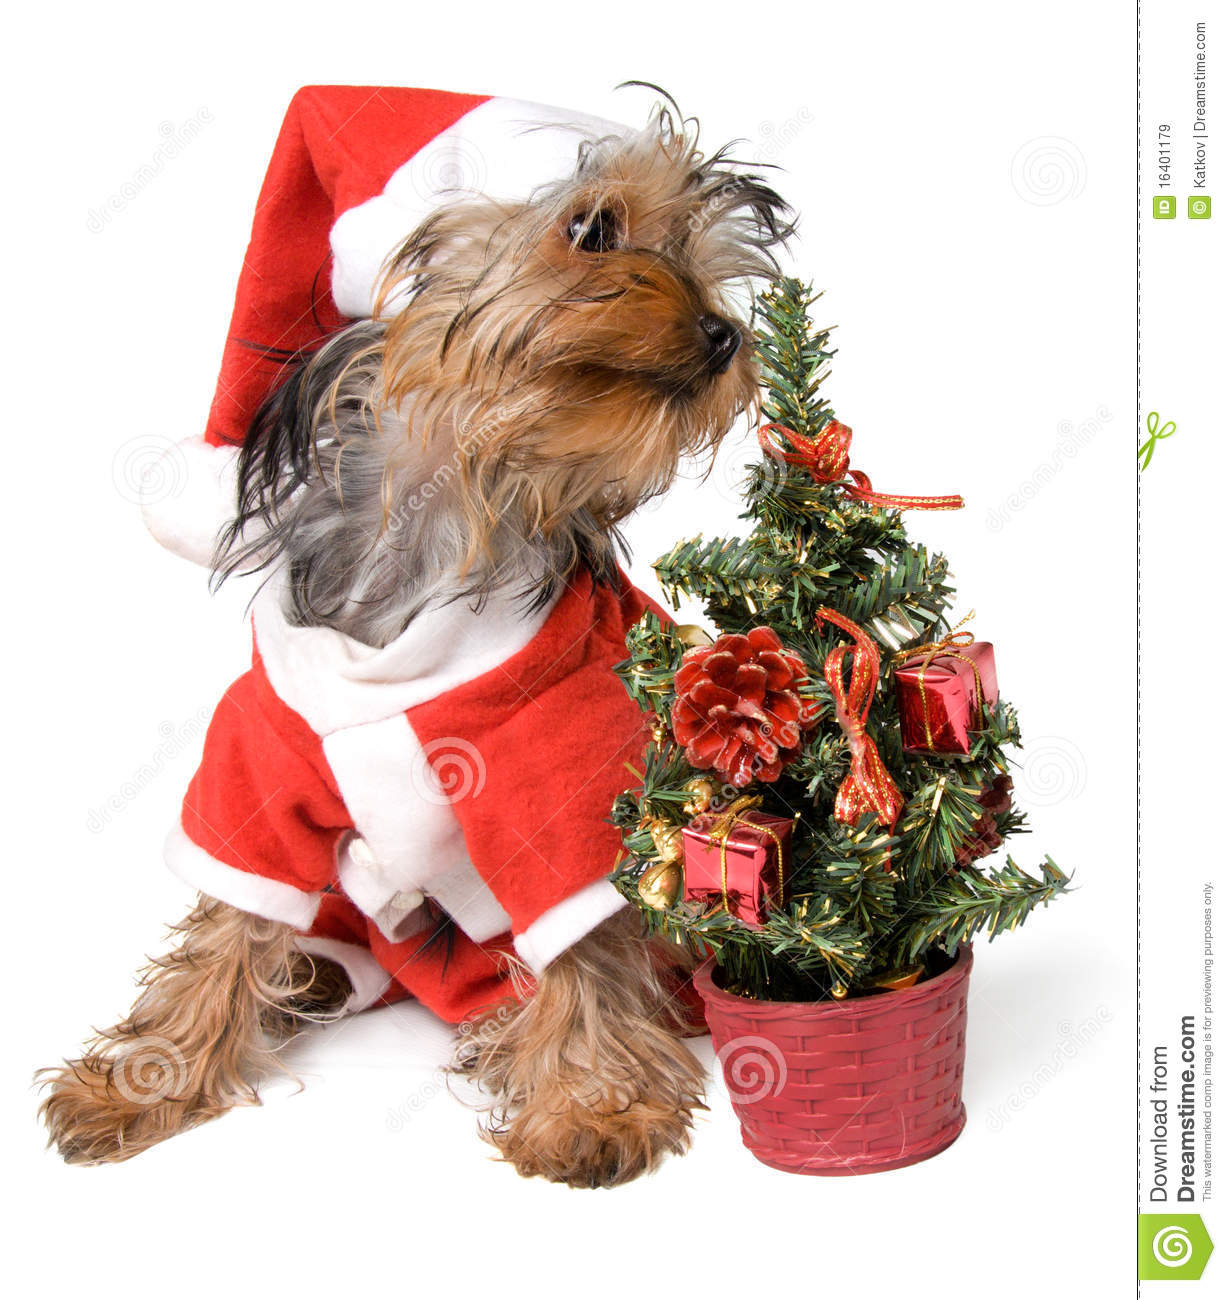 Christmas Yorkie Royalty Free Stock Images   Image  16401179